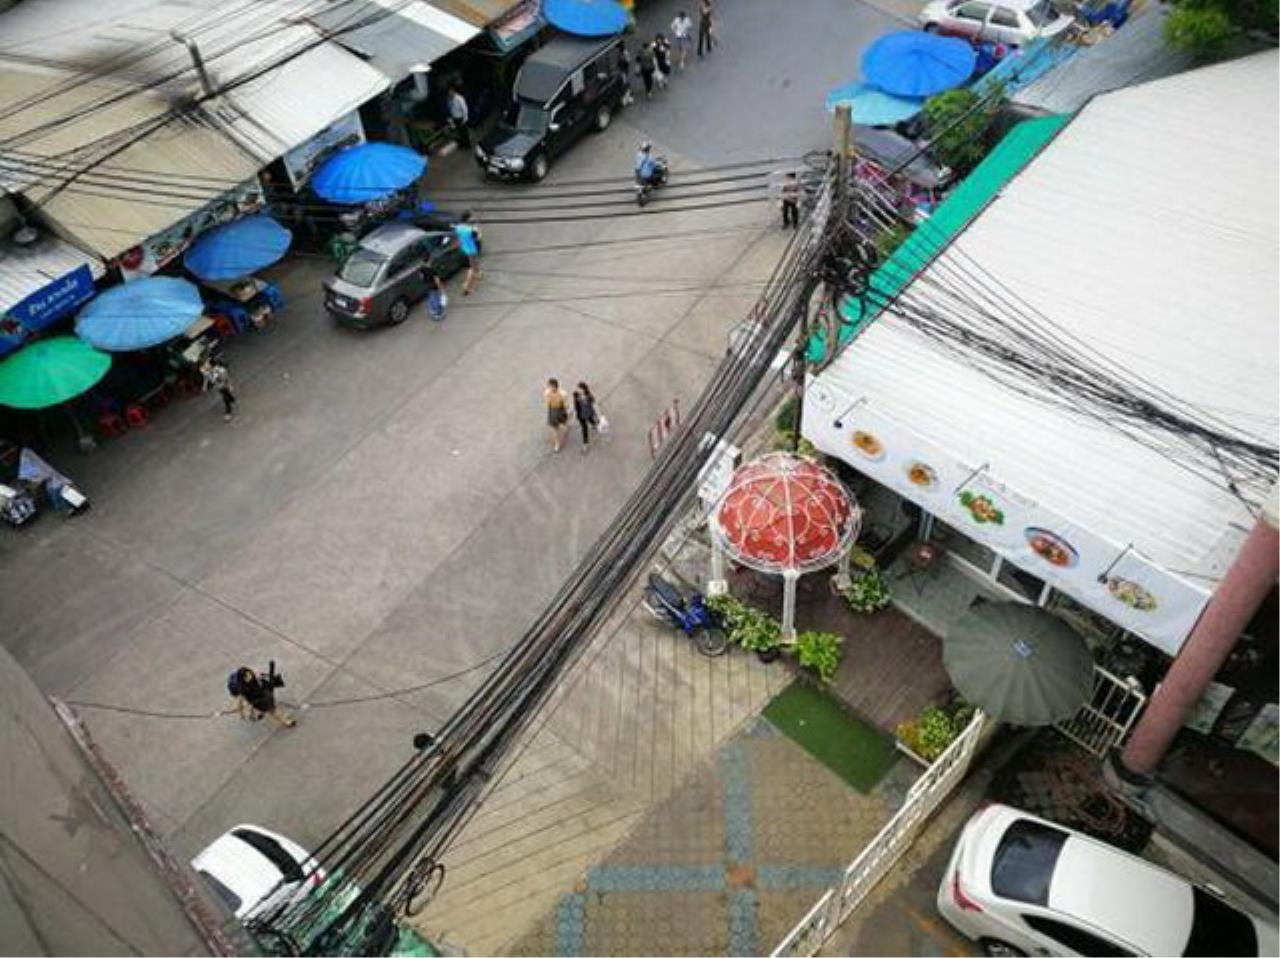 The Agent Property Agency's Office for sale in Rama 9 Soi 6, area 122.8 sq.m., area of ​​1,200 sq.m., 4 storeys, very good location near MRT Rama 9 MRT Cultural Center. To the street culture Thuan Ruammit Road Exit to Ratchadapisek Road. Near Srirat Expressway to Rama 2, Bangna k Silom Sathorn is conveniently located near the intersection of MCOT. Shortcut to Central Rama 9 36